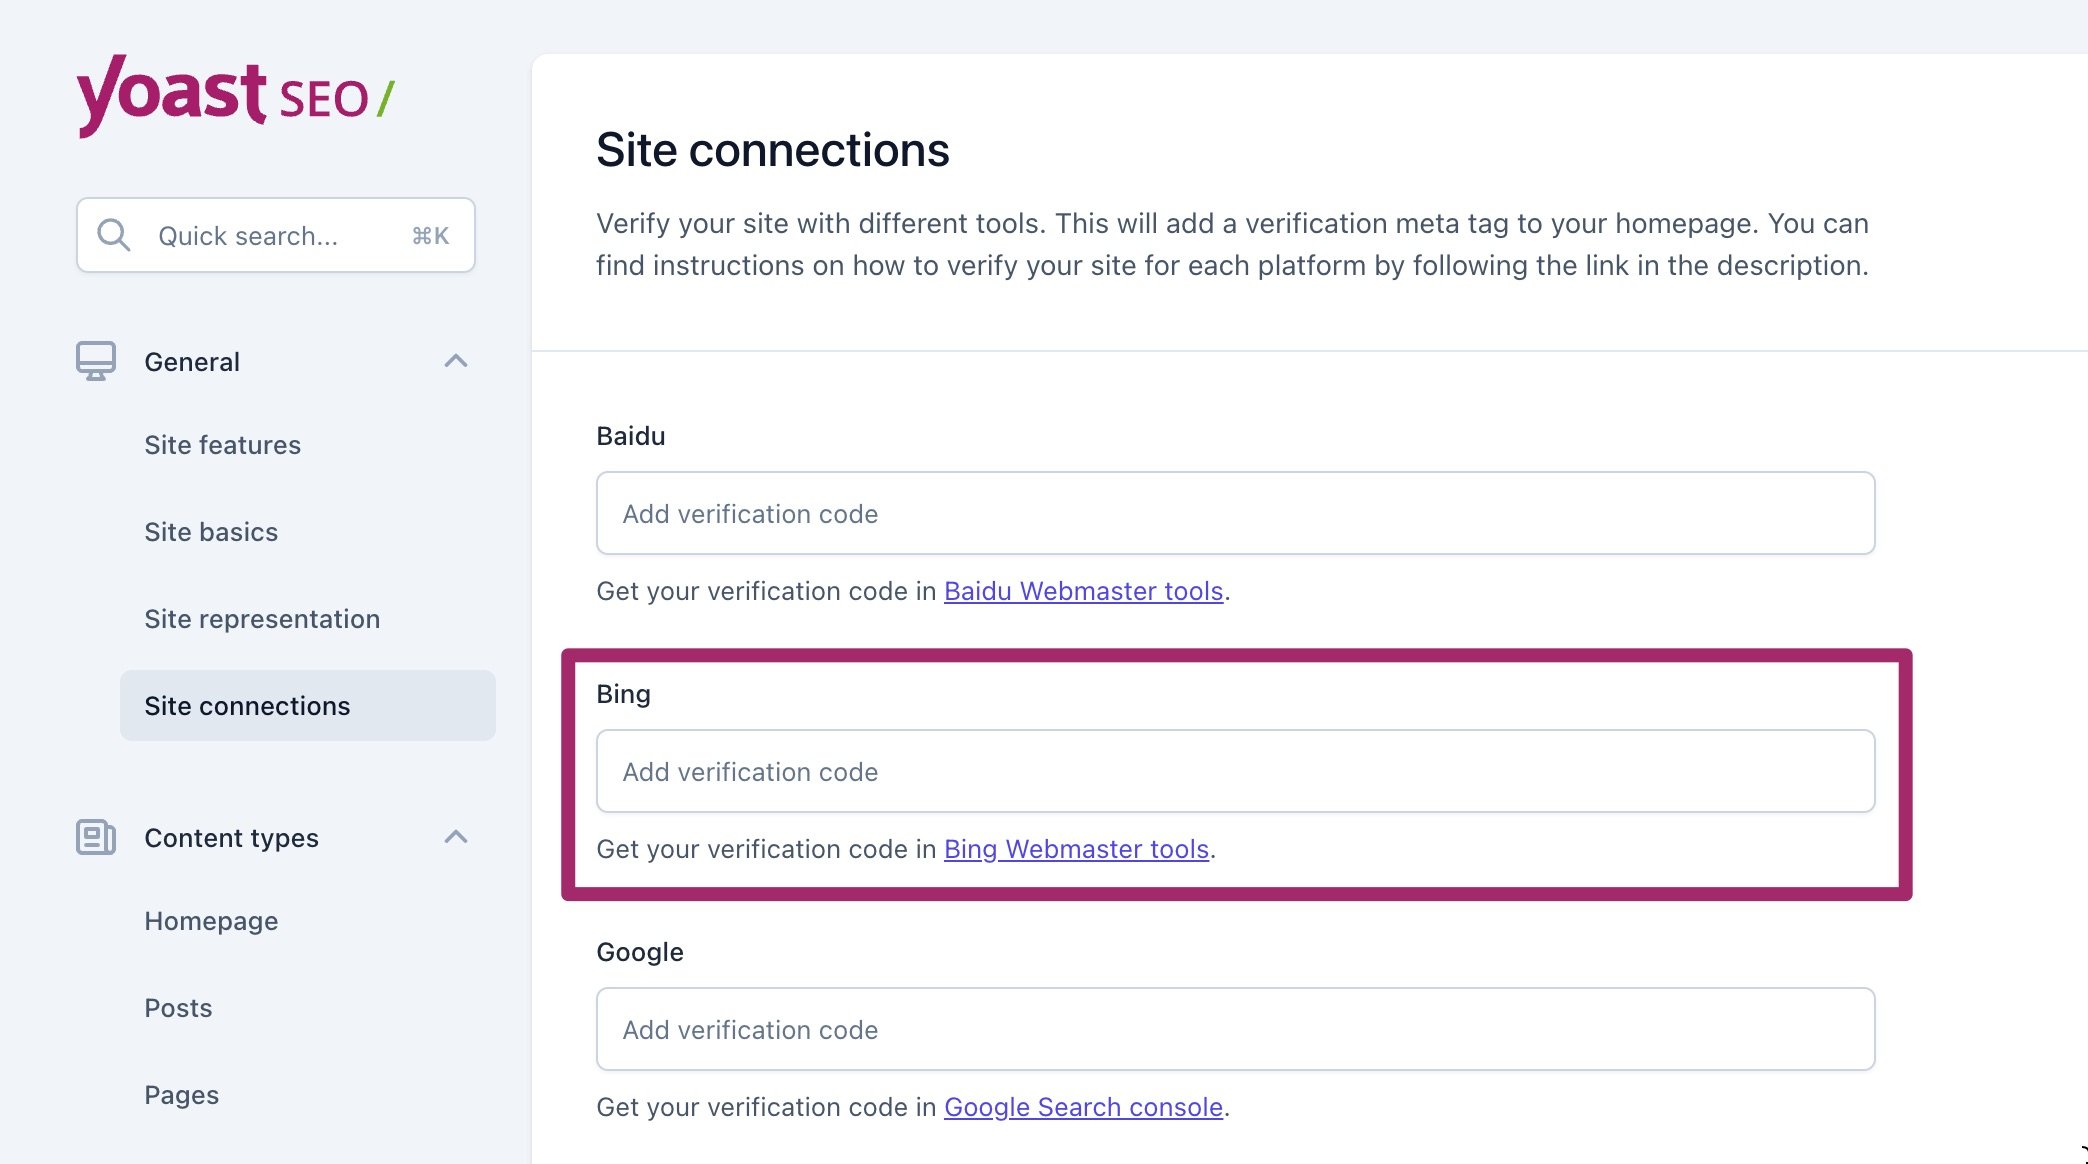 Screenshot of the Site connections settings in Yoast SEO, highlighting the Bing input field.